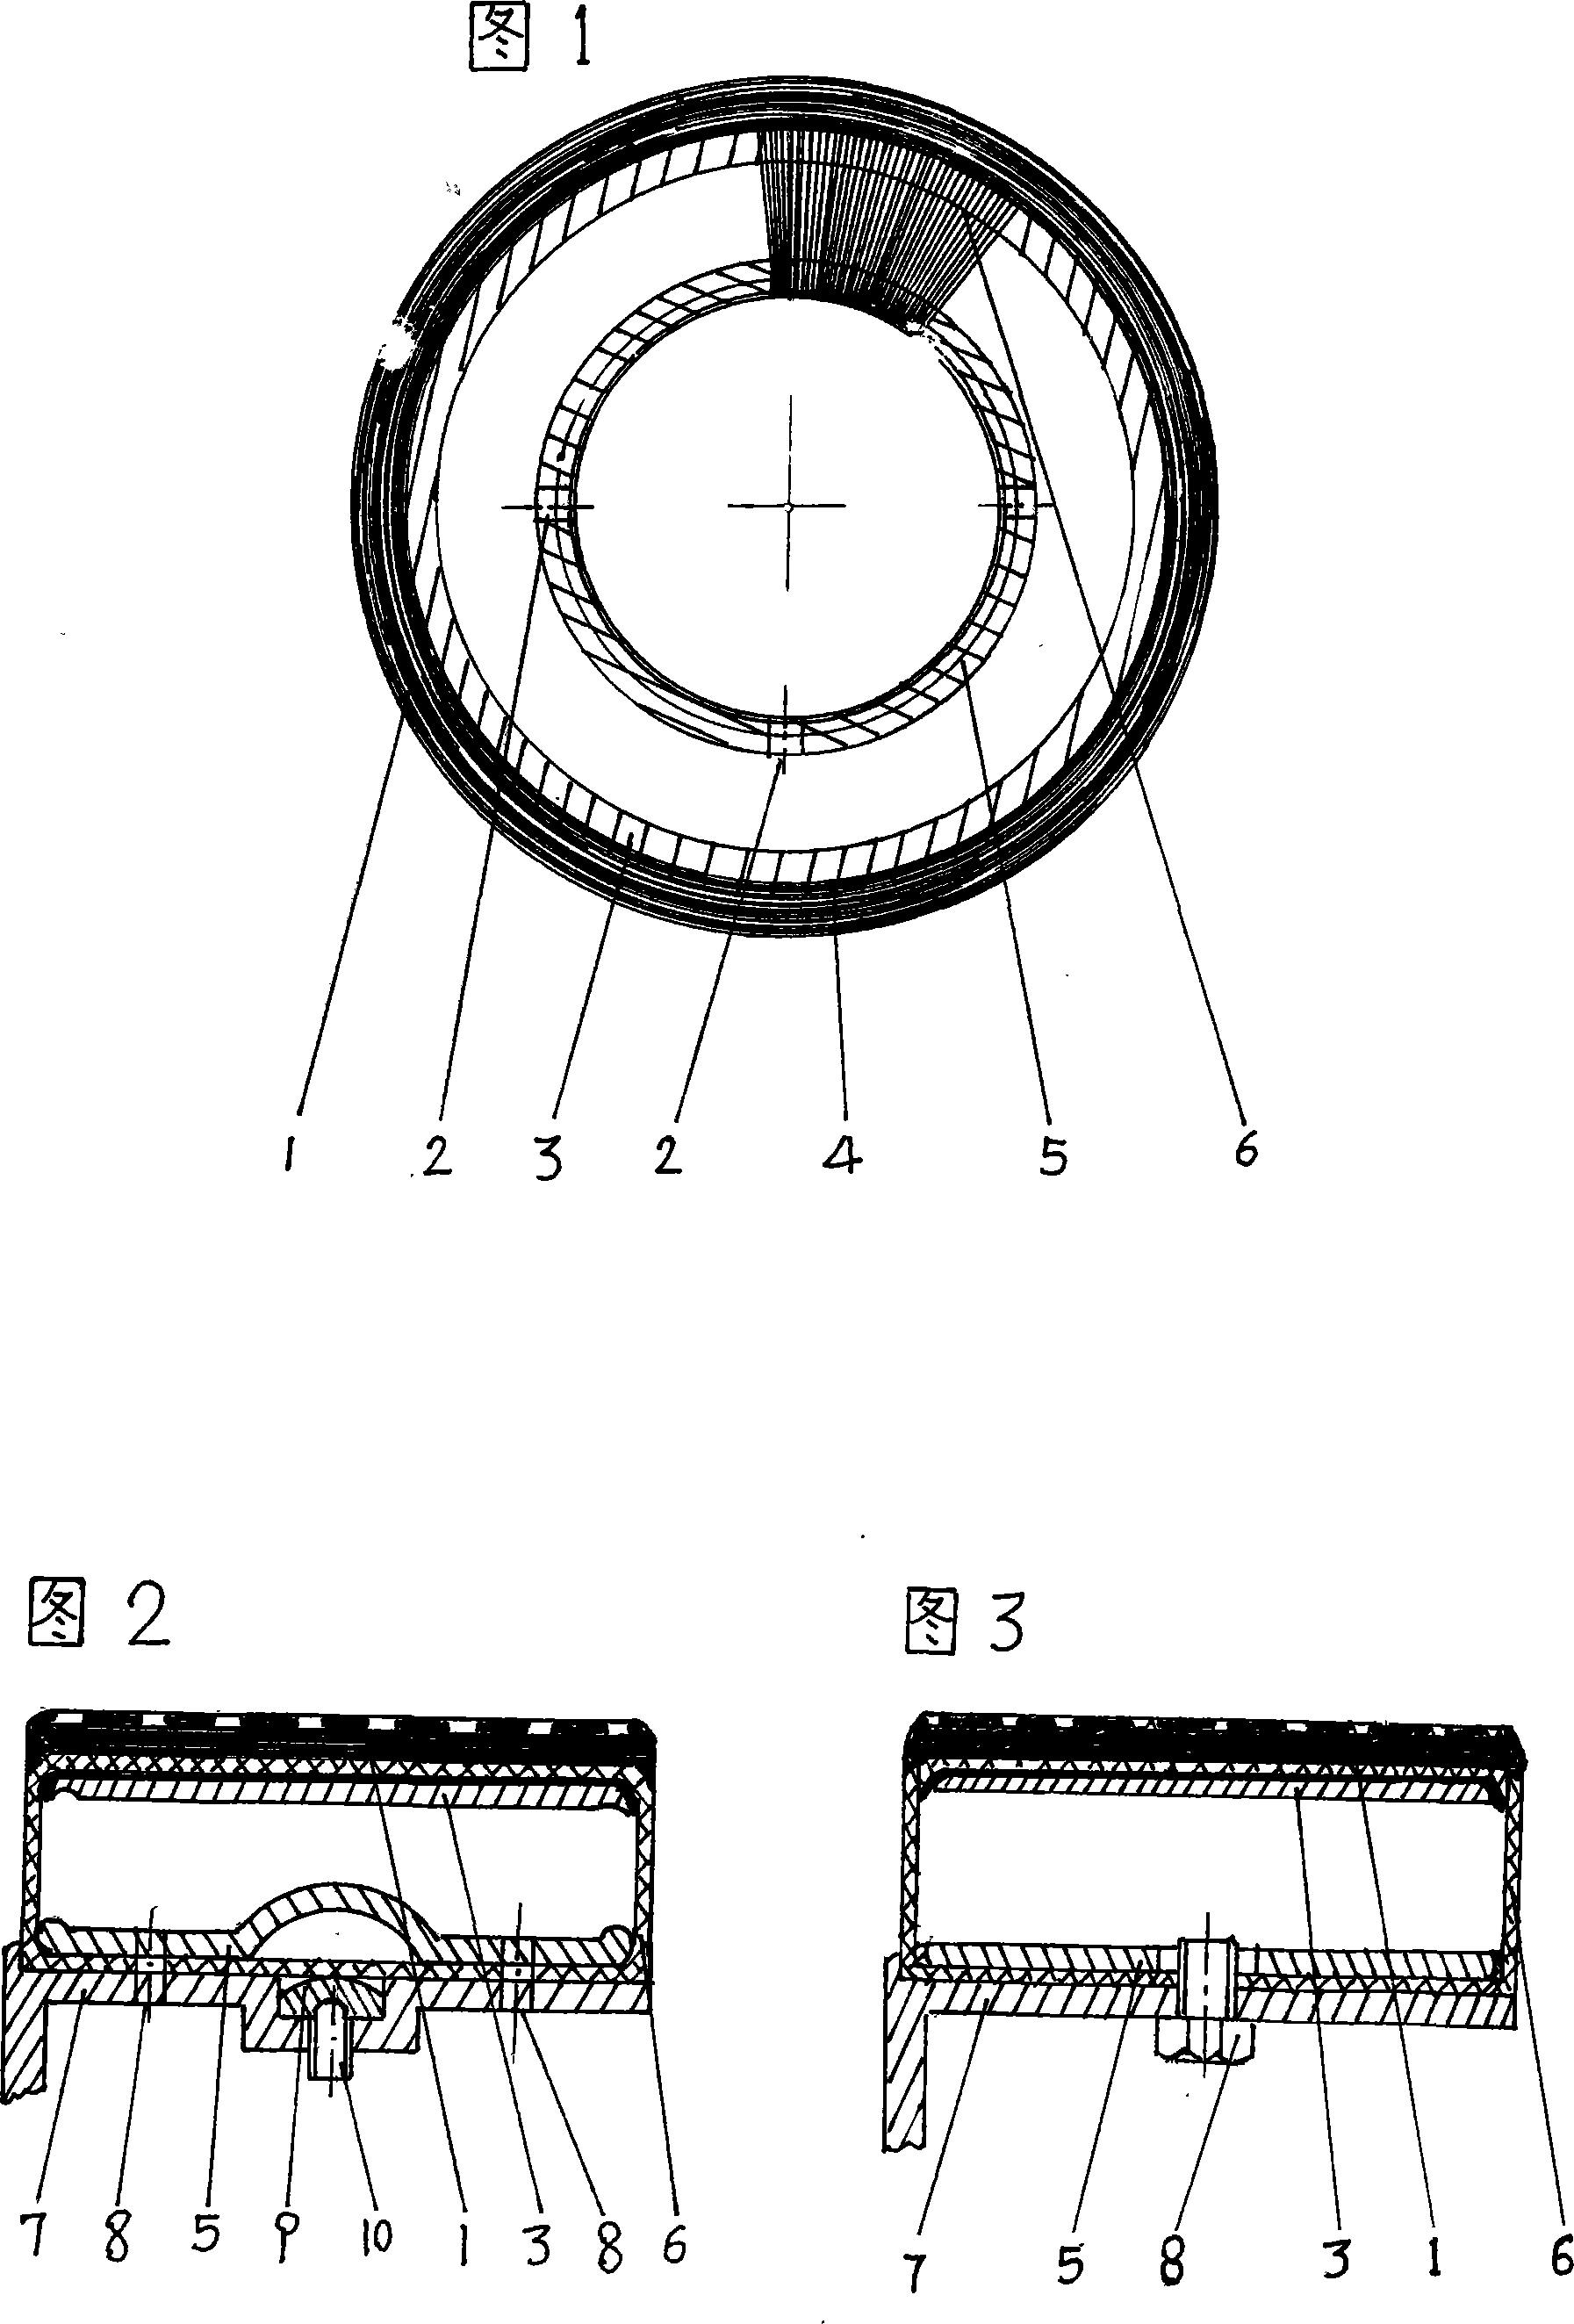 Non-inflating cavity type tyre